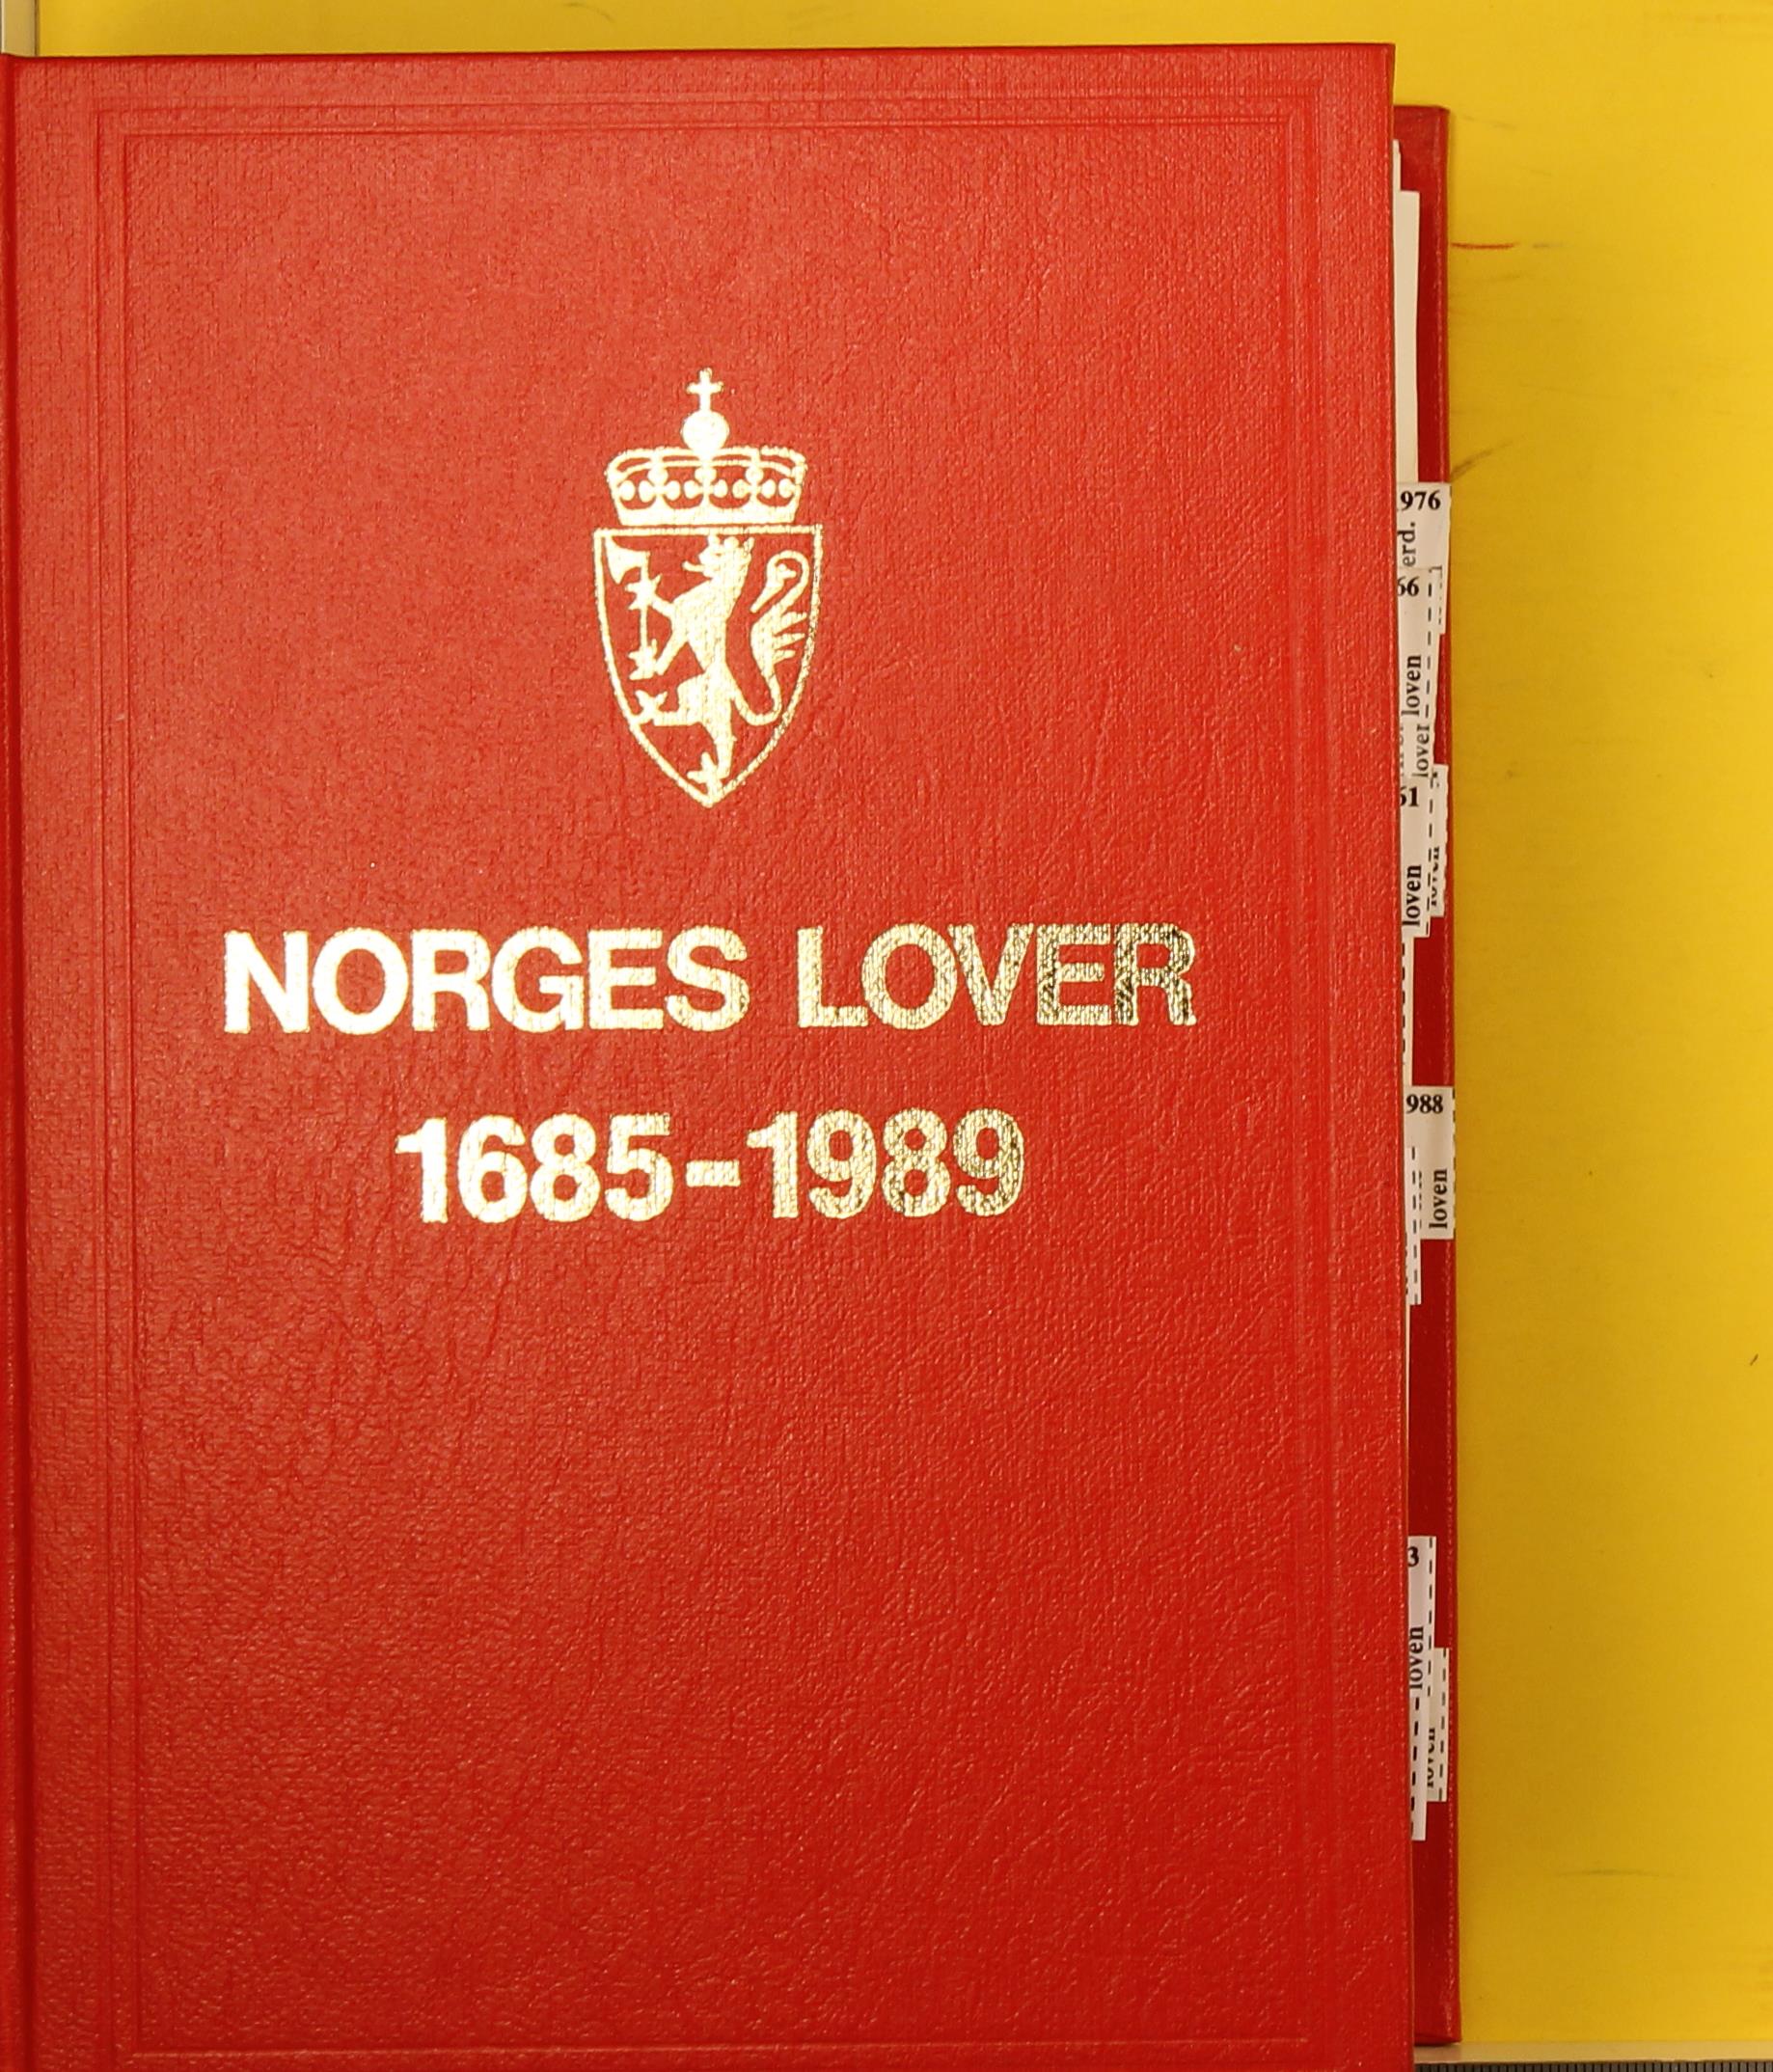 Norges lover 1685-1989